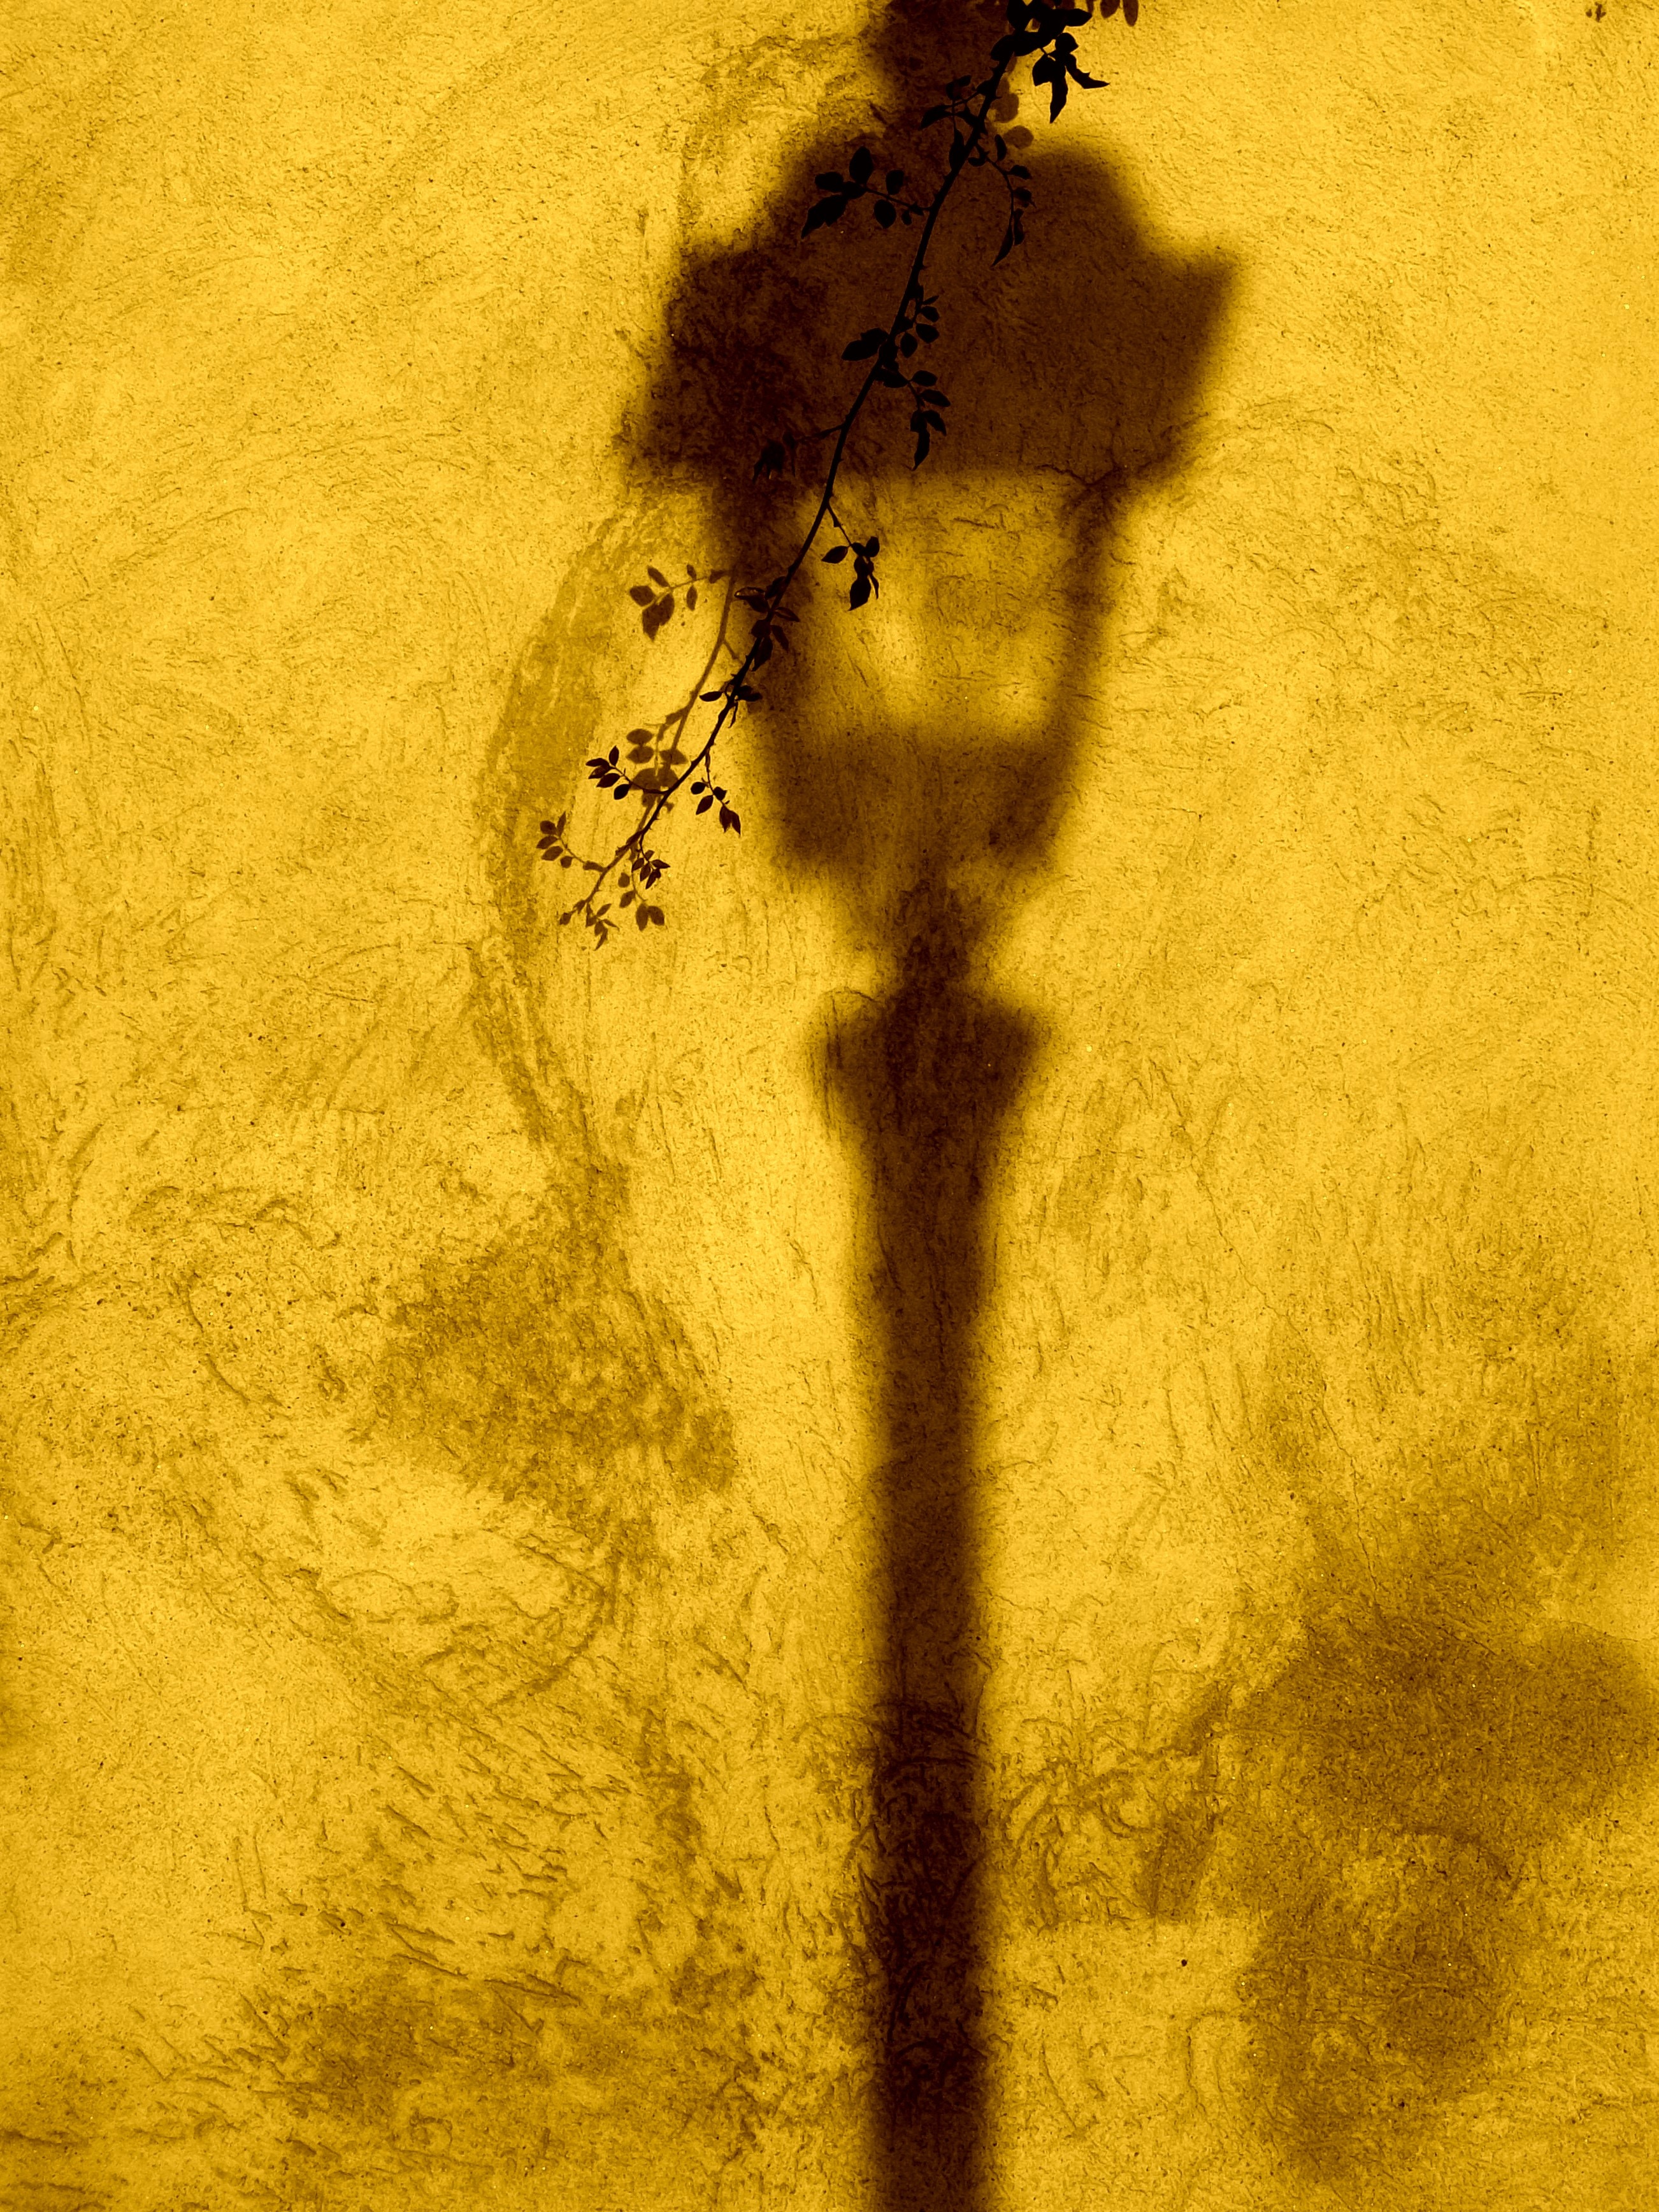 lantern, lamp, yellow, texture, textures, branch, shadow, wall High Definition image